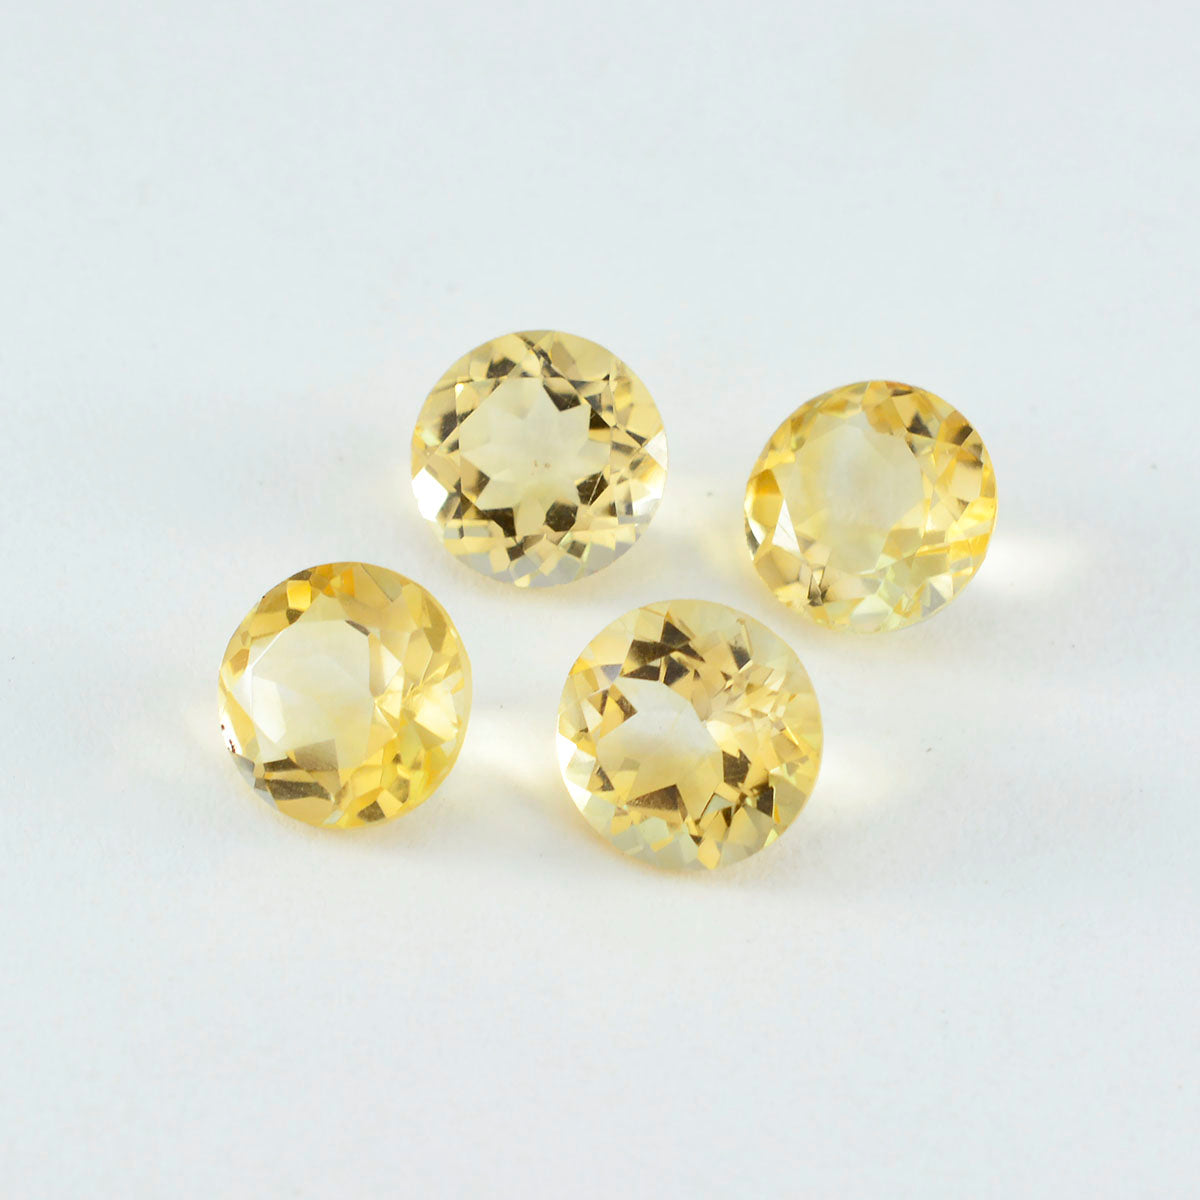 Riyogems 1PC Natural Yellow Citrine Faceted 10x10 mm Round Shape A+ Quality Loose Gems